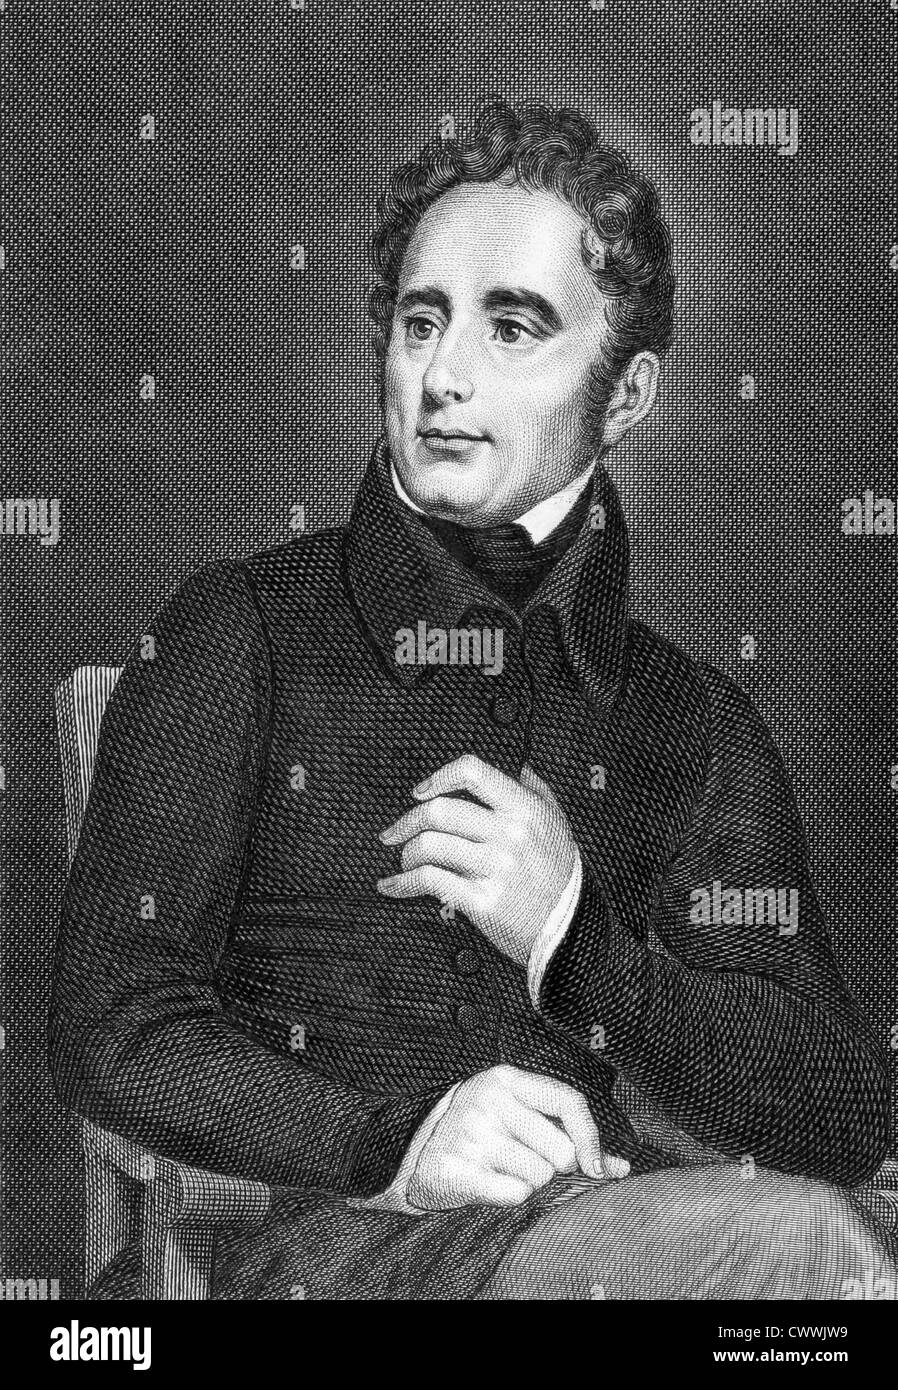 Alphonse de Lamartine (1790-1869) on engraving from 1859. French writer, poet and politician. Stock Photo